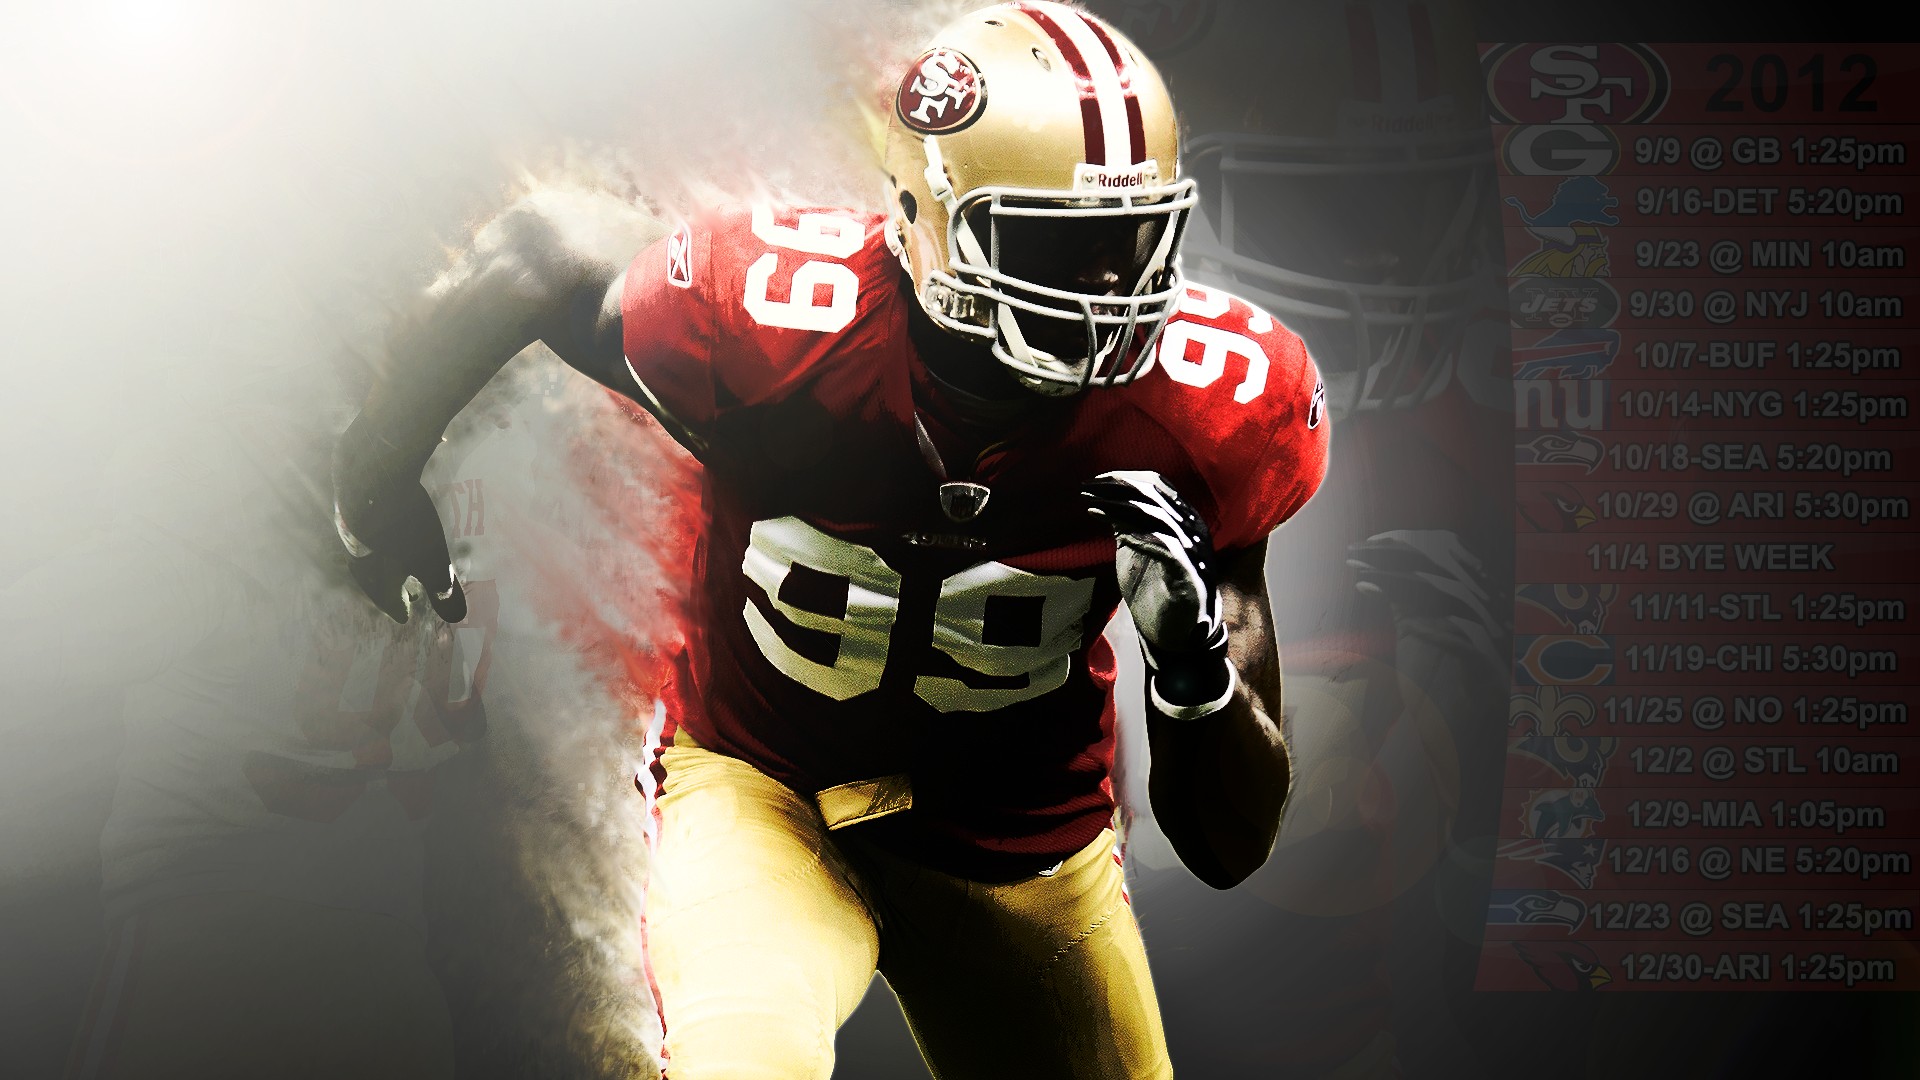 Windows Wallpaper San Francisco 49ers With high-resolution 1920X1080 pixel. You can use this wallpaper for your Mac or Windows Desktop Background, iPhone, Android or Tablet and another Smartphone device